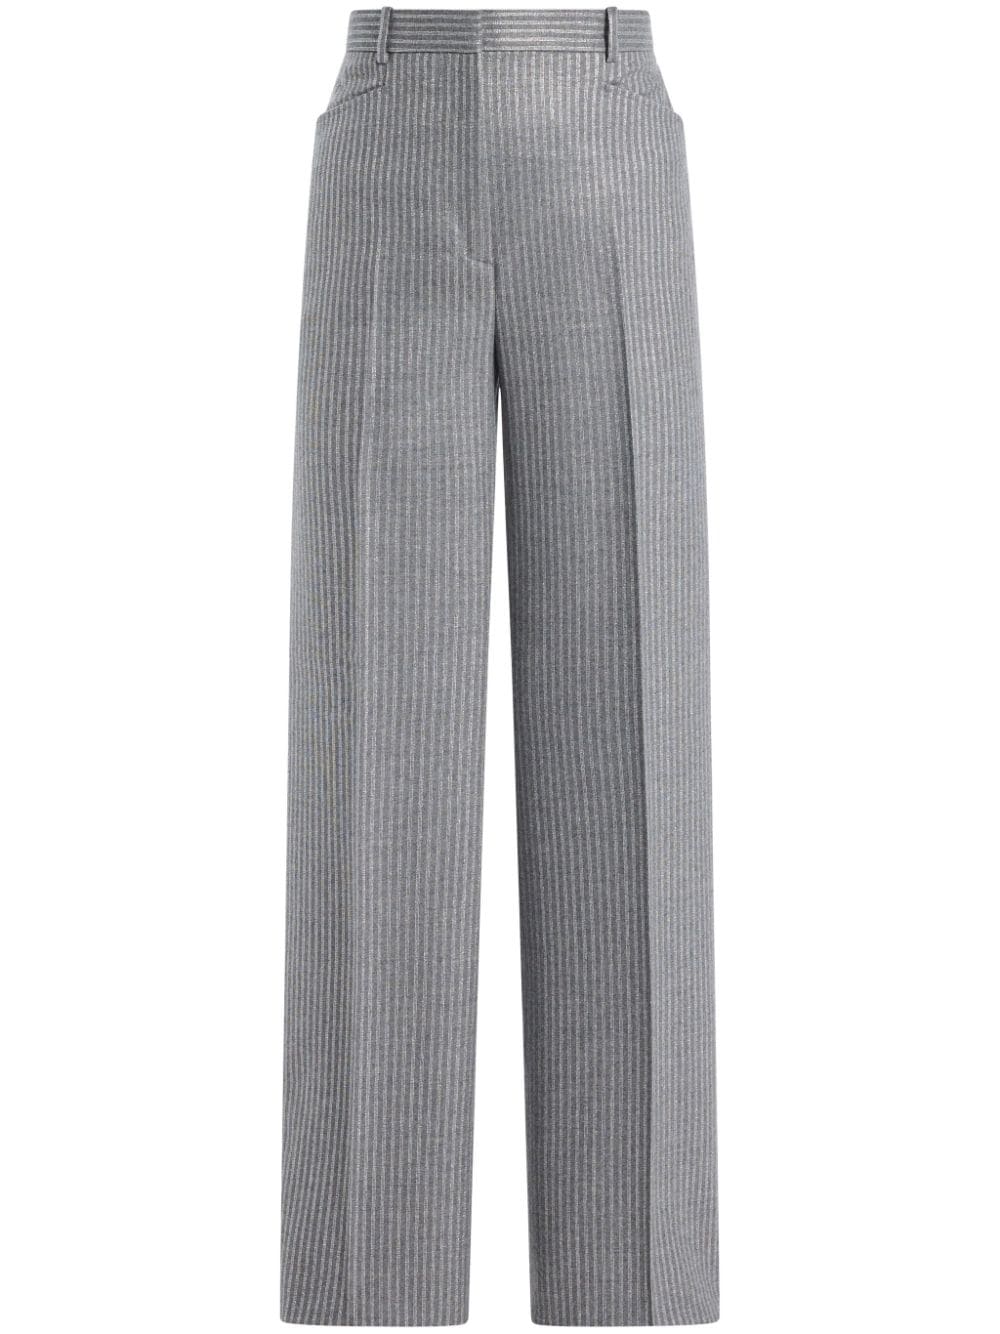 TOM FORD striped trousers - Grey von TOM FORD